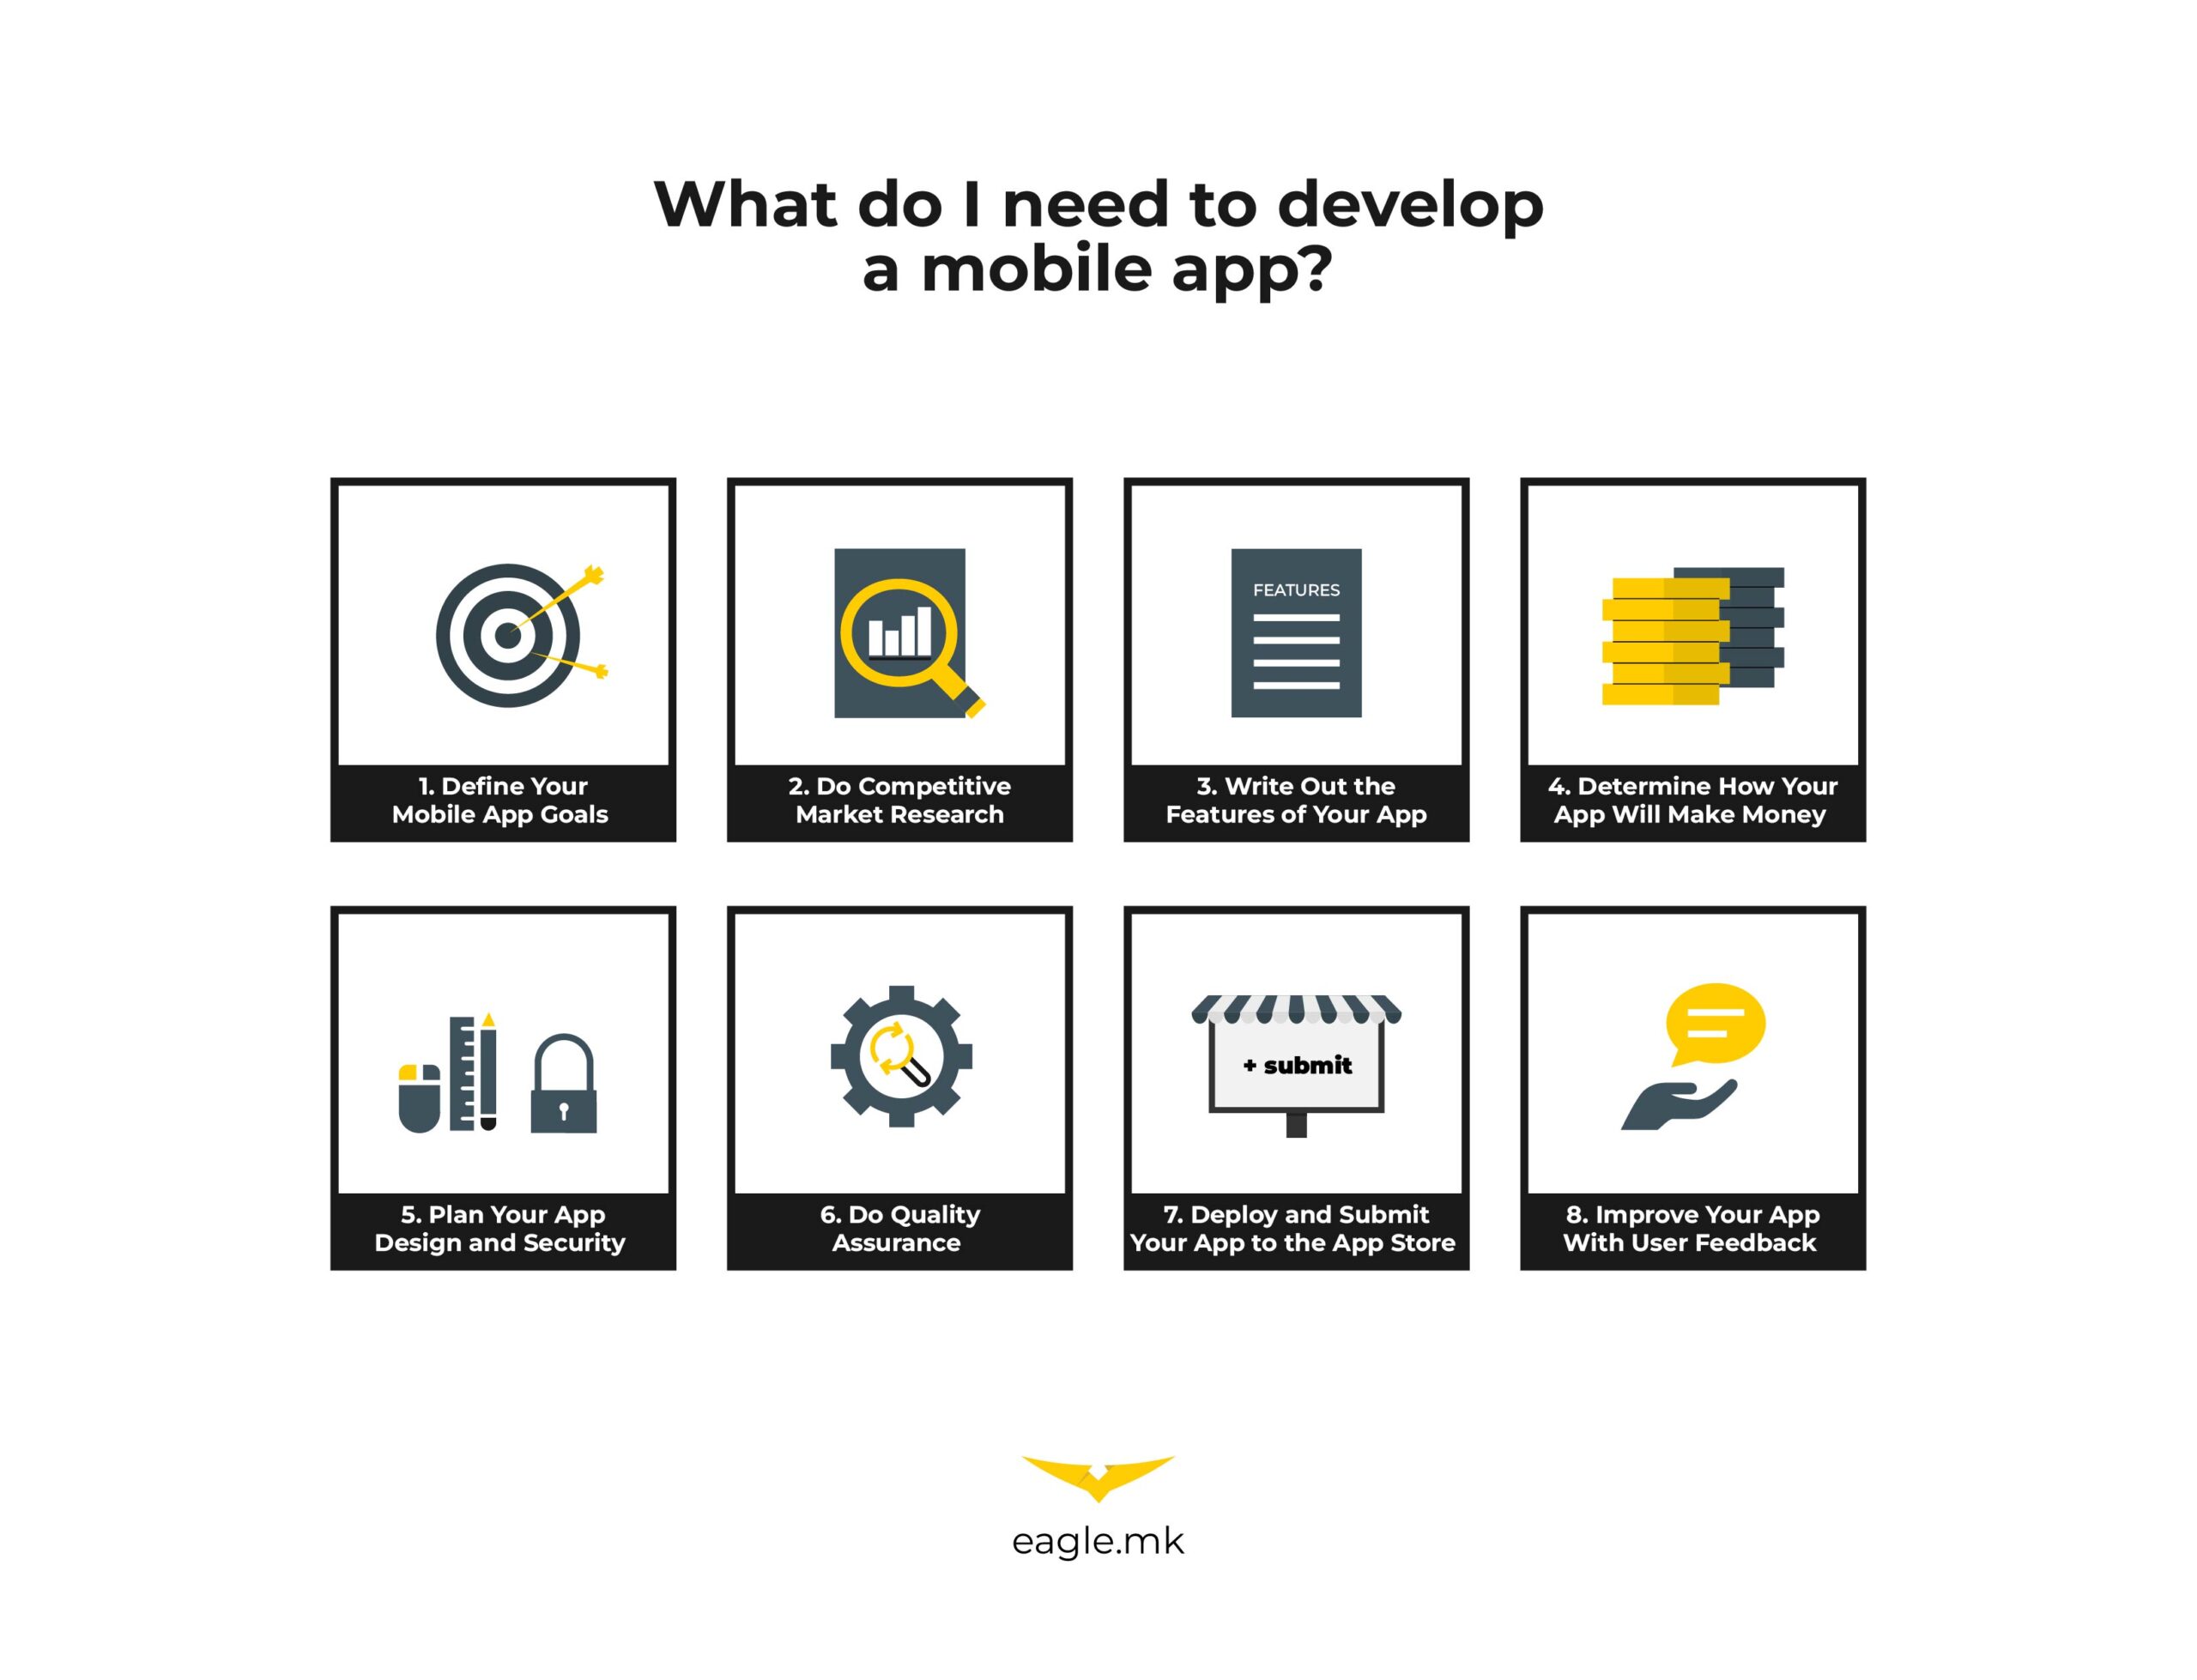 what do I need to develop a mobile app